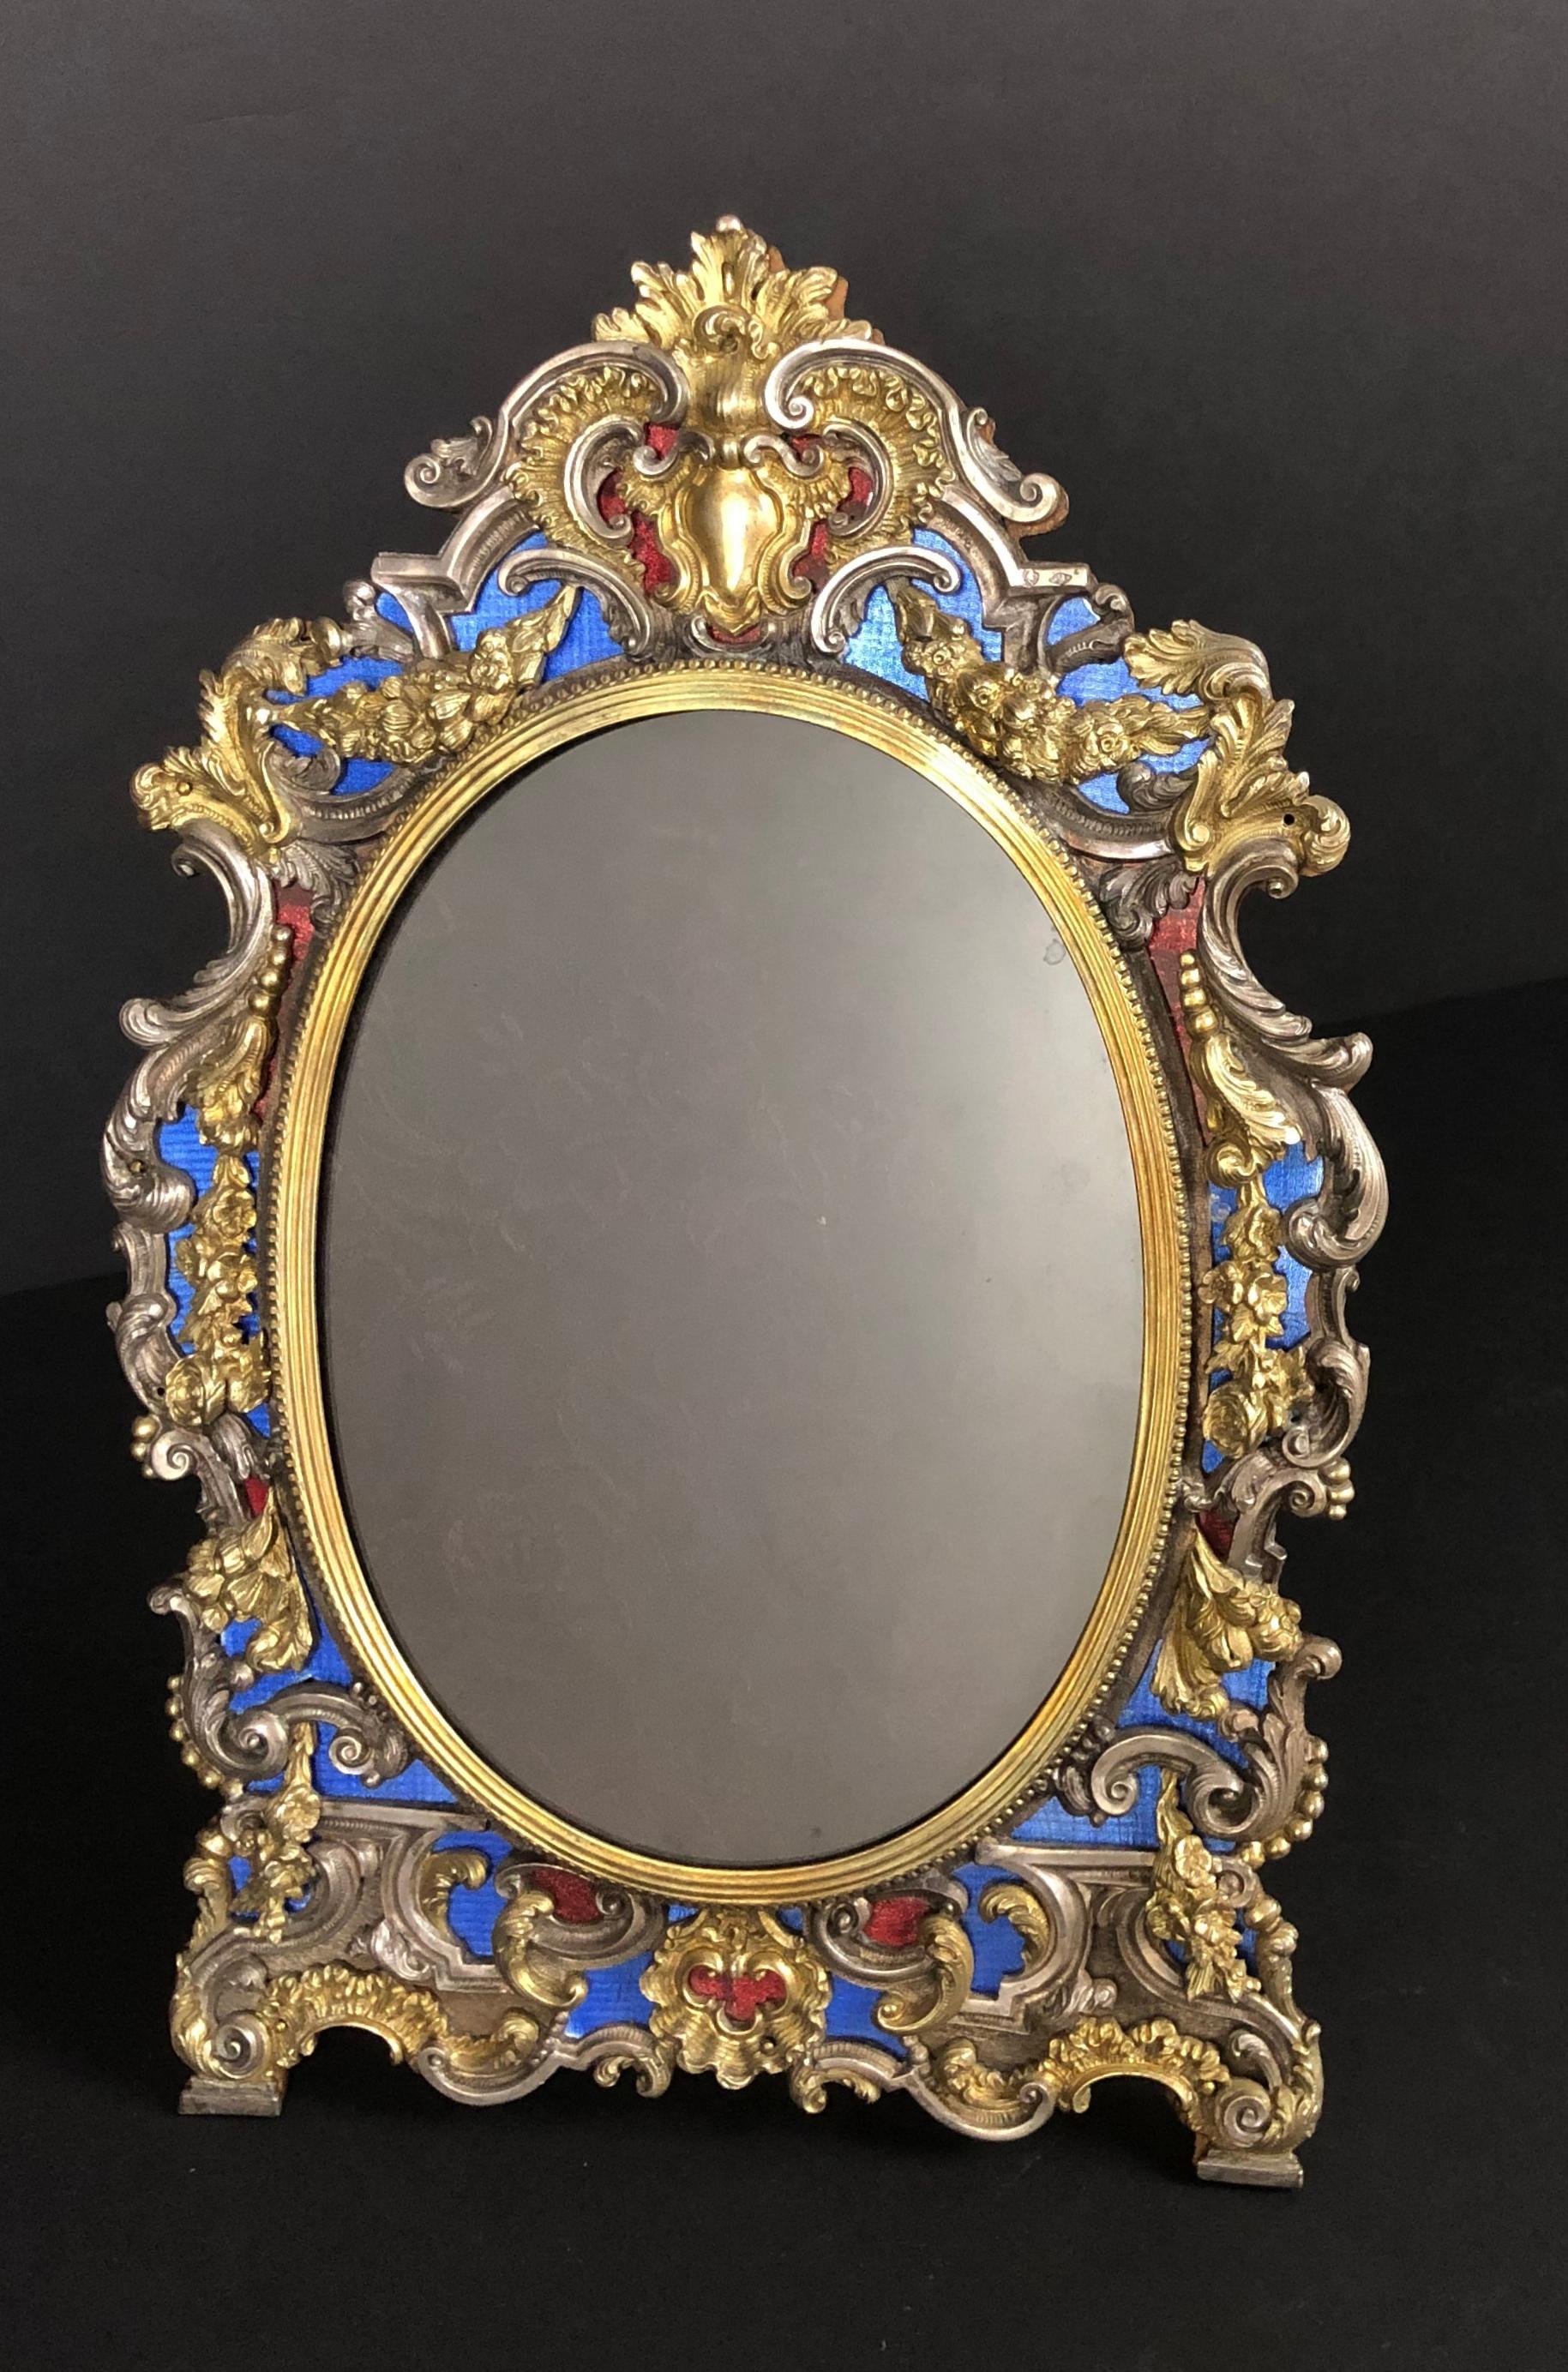 Antique (gilt) vermeil over sterling silver ornate picture frame with red and blue vitreous enamel, Italy, circa 1890. Has hallmark on front. Oval frame is surrounded by beautiful scroll work and floral swag garlands.